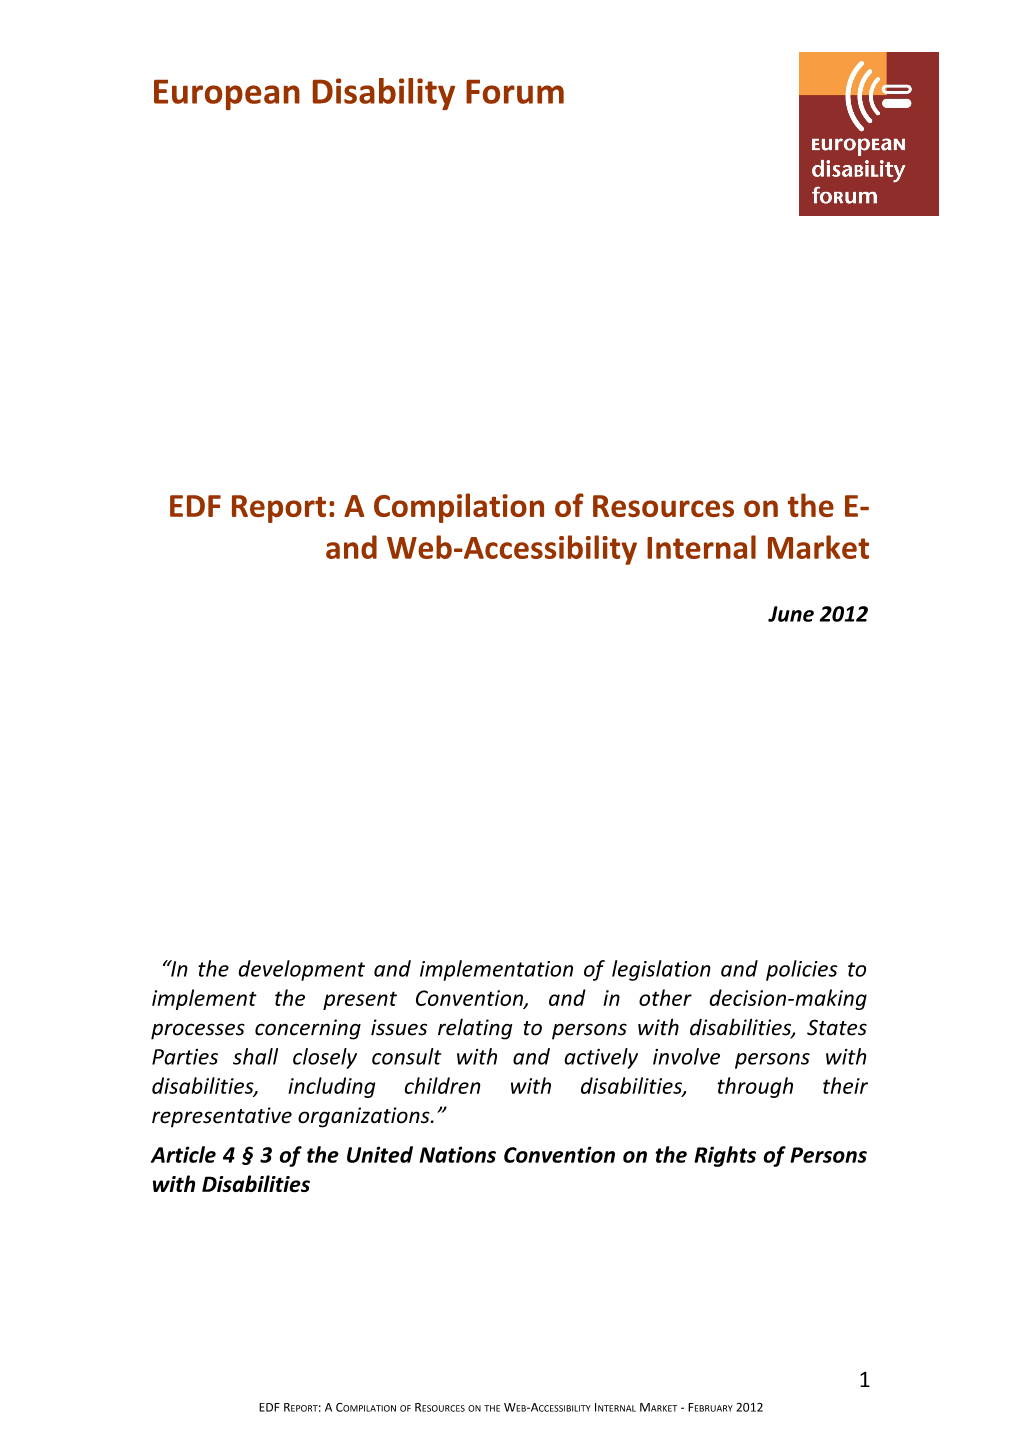 EDF Report: a Compilation of Resources on the E- and Web-Accessibility Internal Market